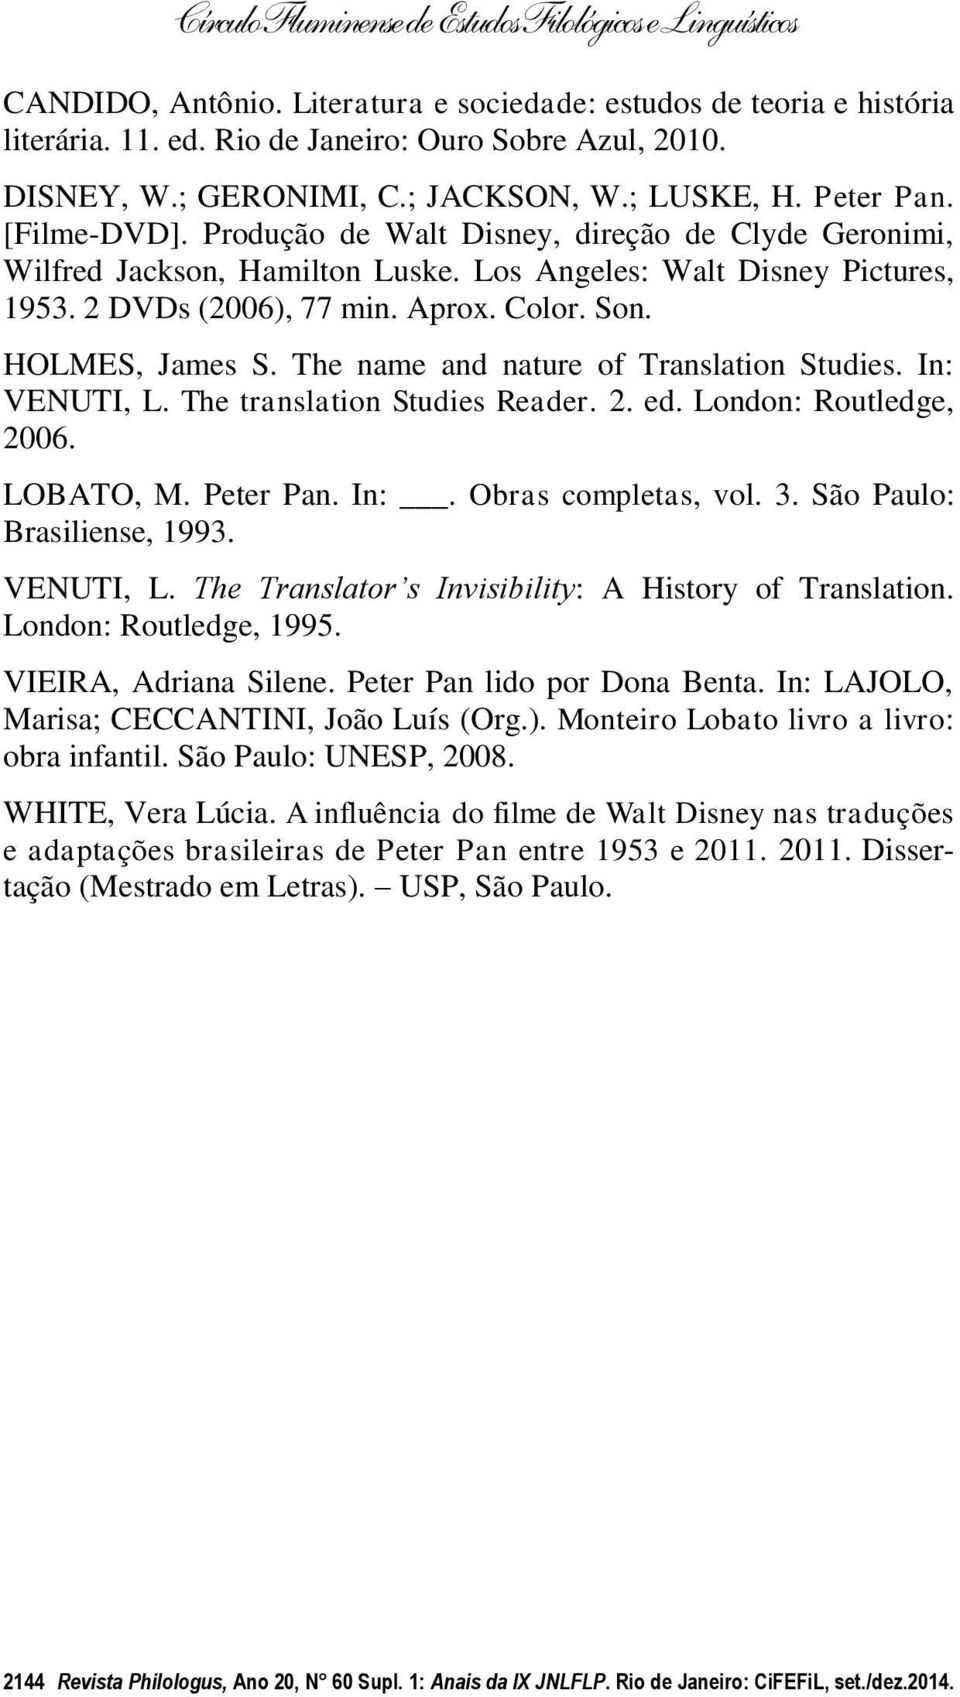 The name and nature of Translation Studies. In: VENUTI, L. The translation Studies Reader. 2. ed. London: Routledge, 2006. LOBATO, M. Peter Pan. In:. Obras completas, vol. 3.